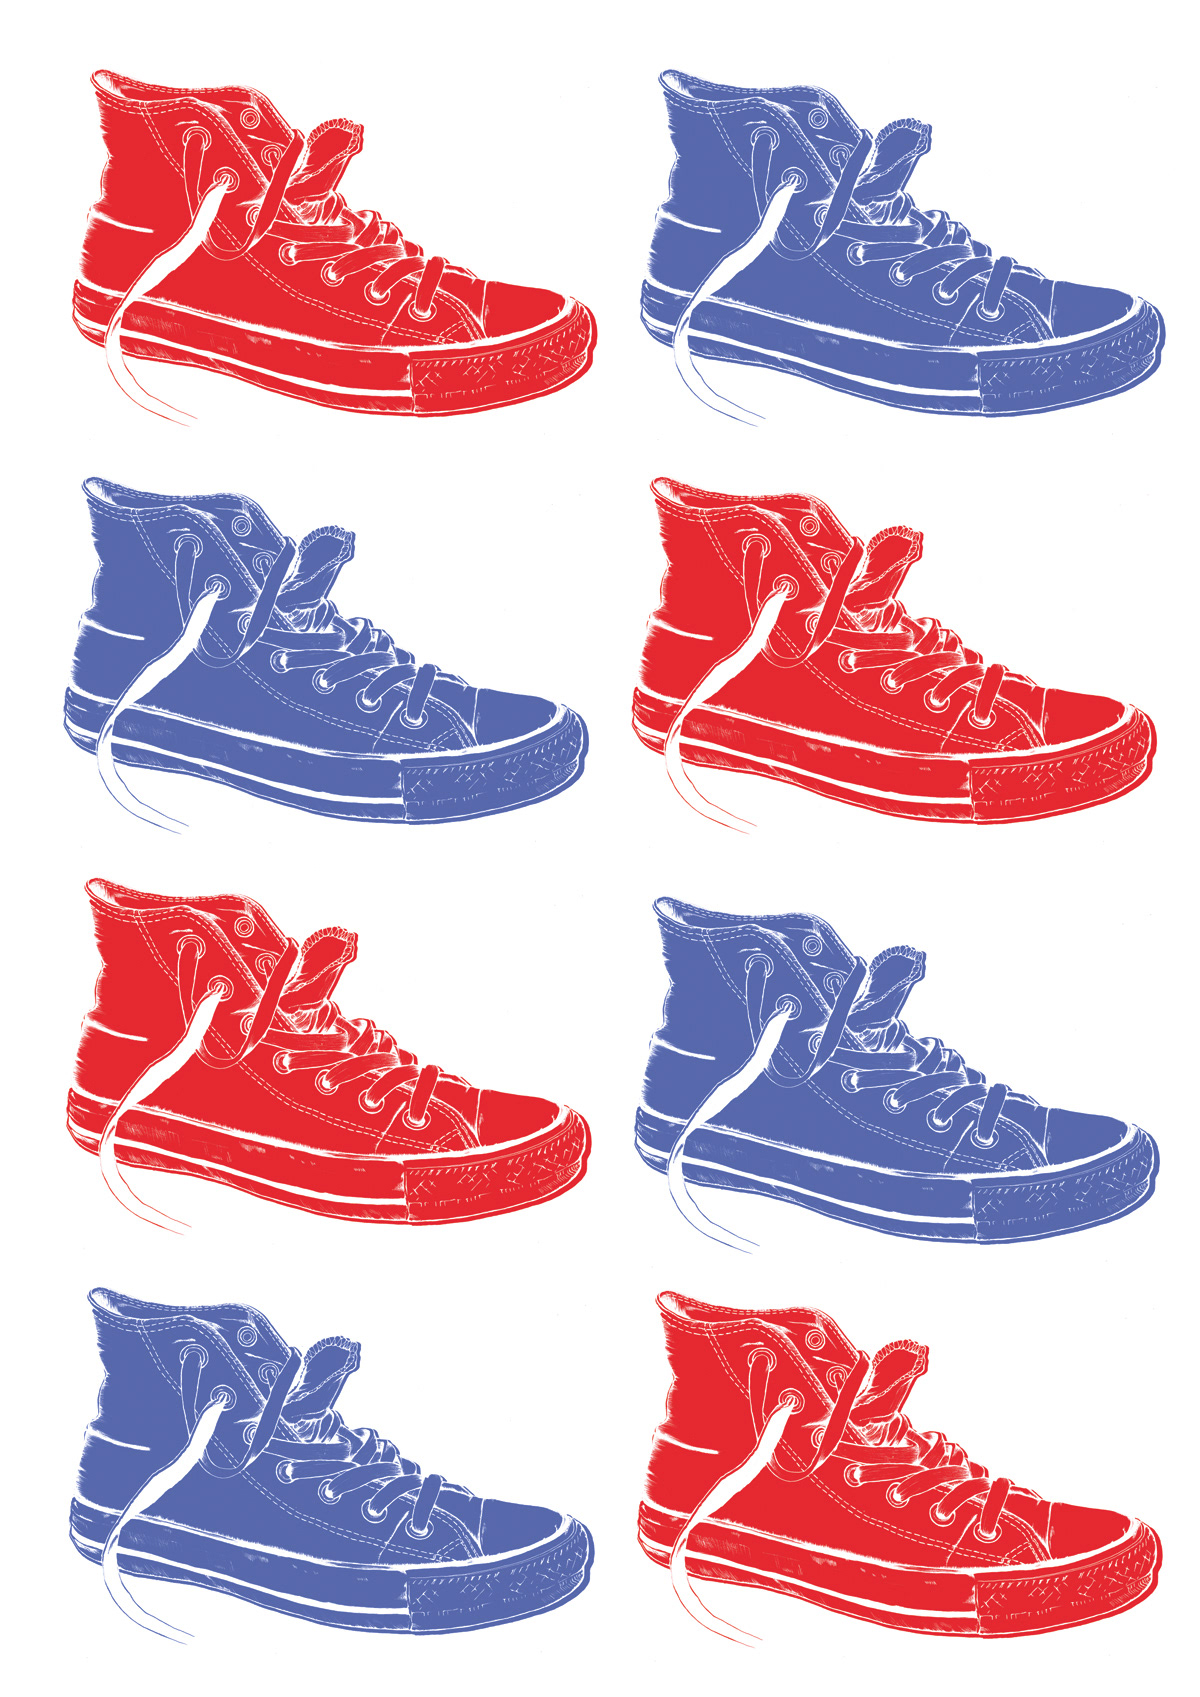 matilde digmann sneakers  drawing ball point pen blue and red girl with glasses